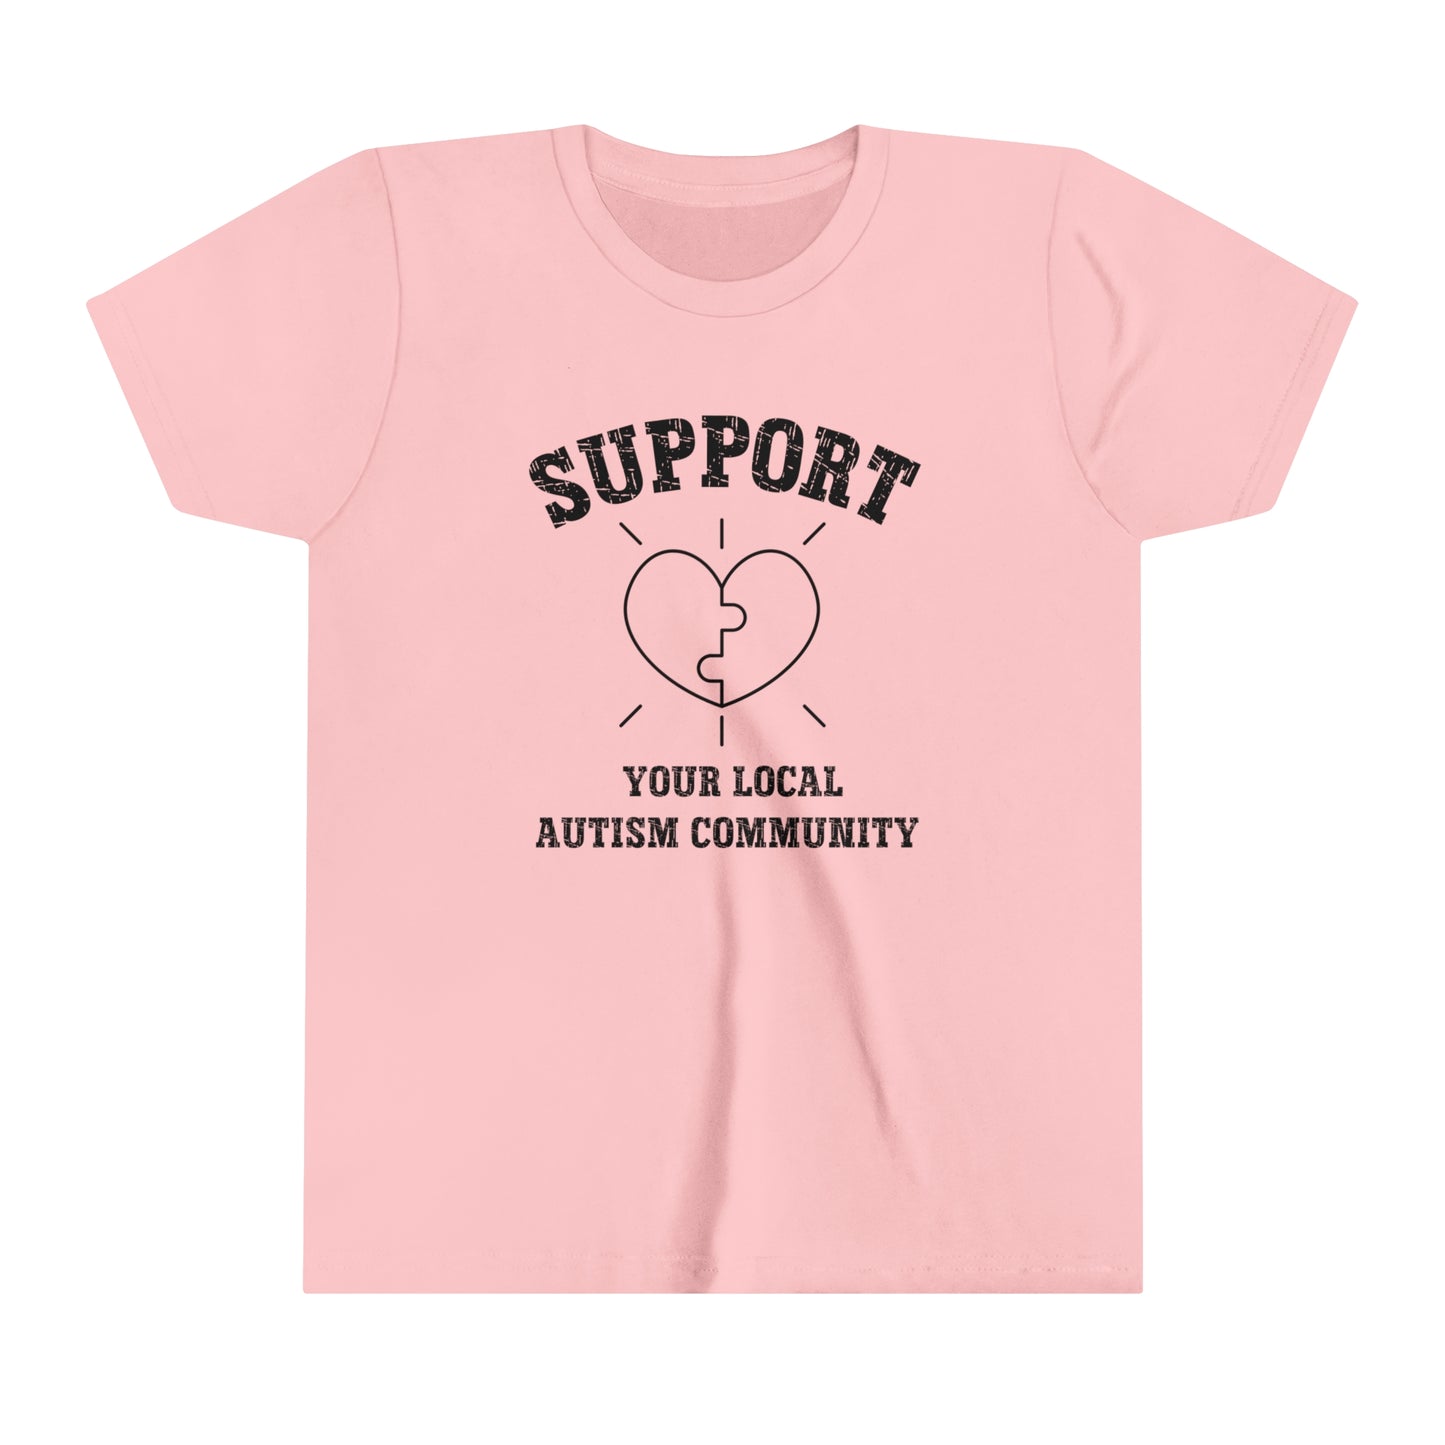 Copy of Support Autism Community Autism Advocate Youth Shirt